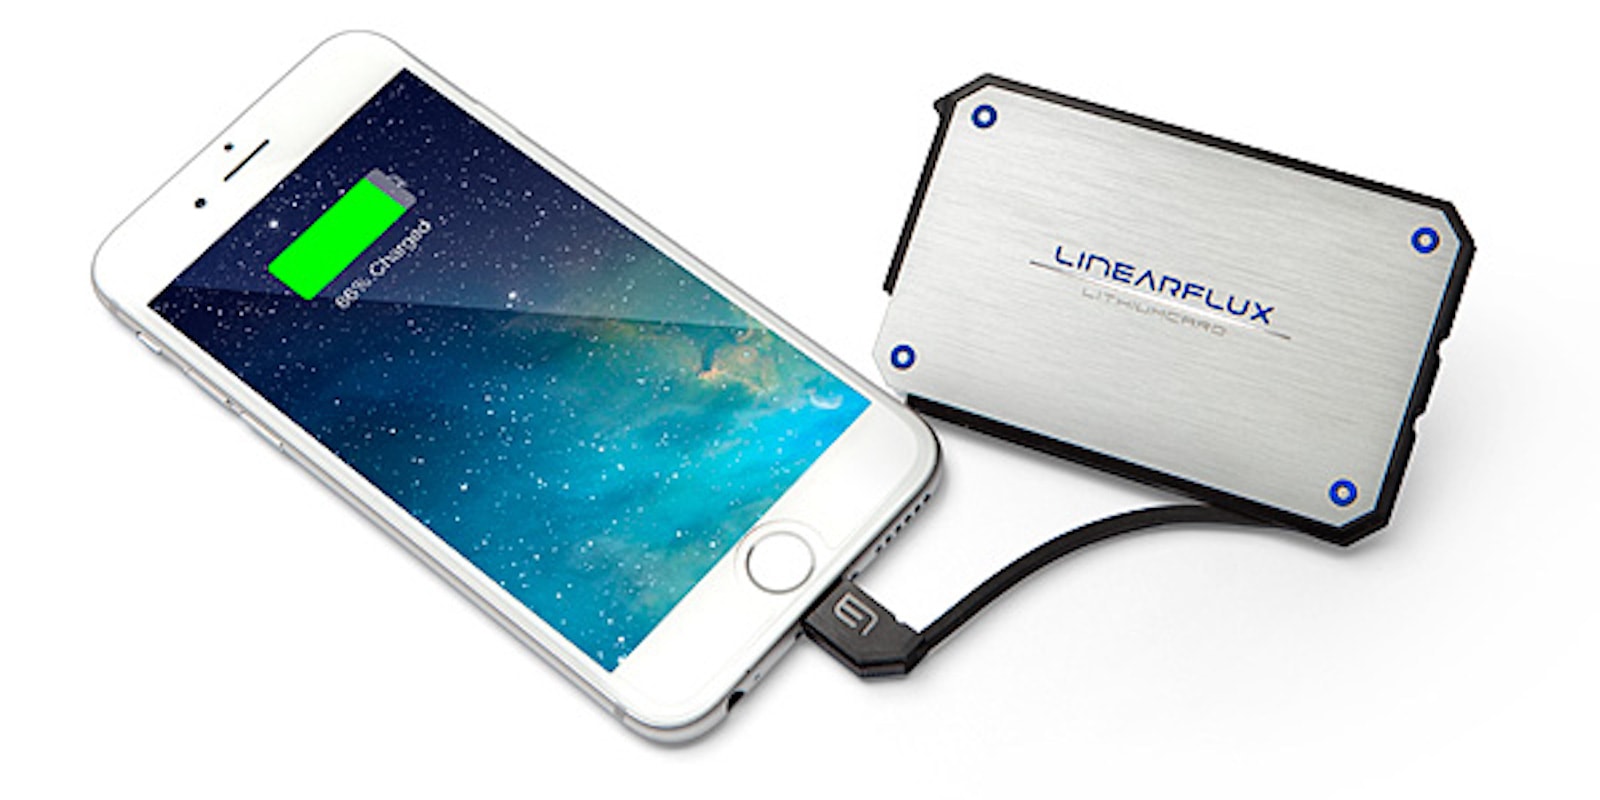 This is the ultimate in portable power, with enough power for 2 devices at once, yet able to fit in most wallets.